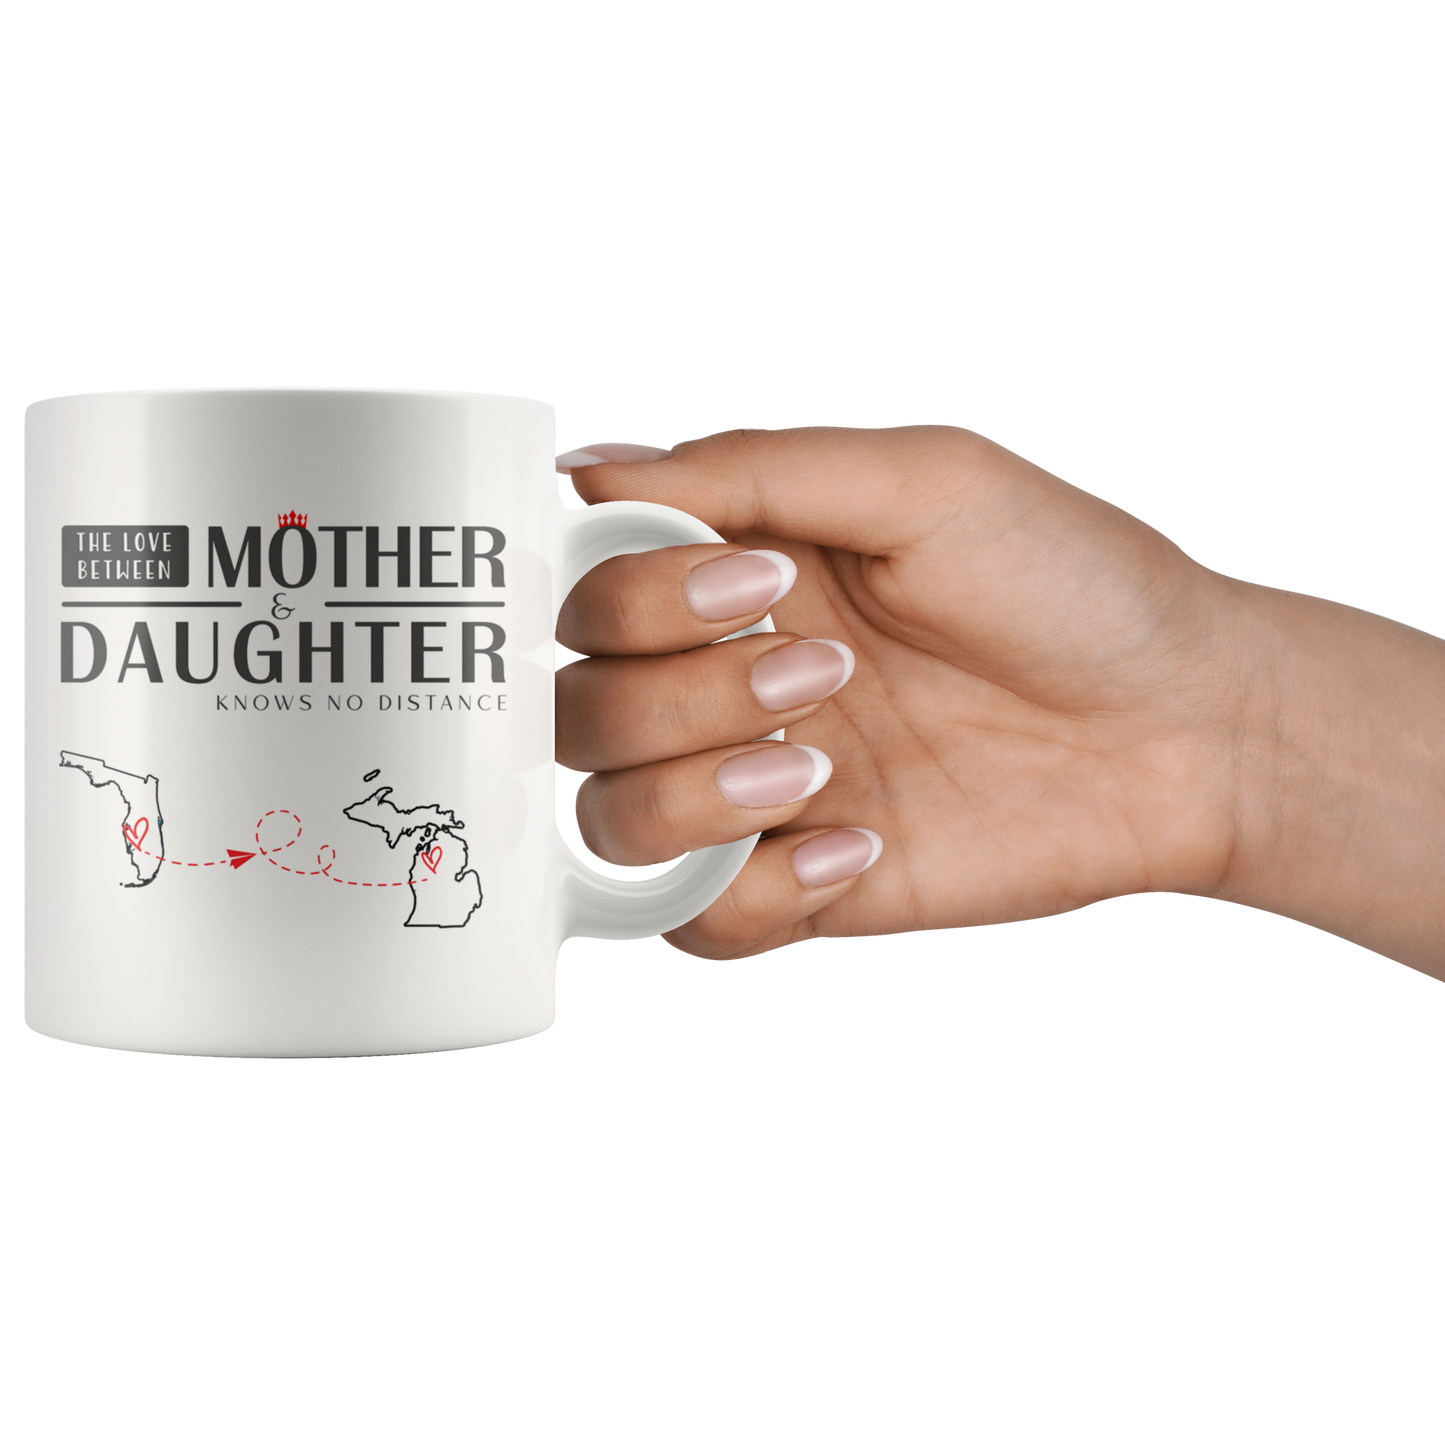 M-20527703-sp-26912 - [ Florida | Michigan ] (mug_11oz_white) Long Distance Mom - The Love Between Mother  Daughter Knows